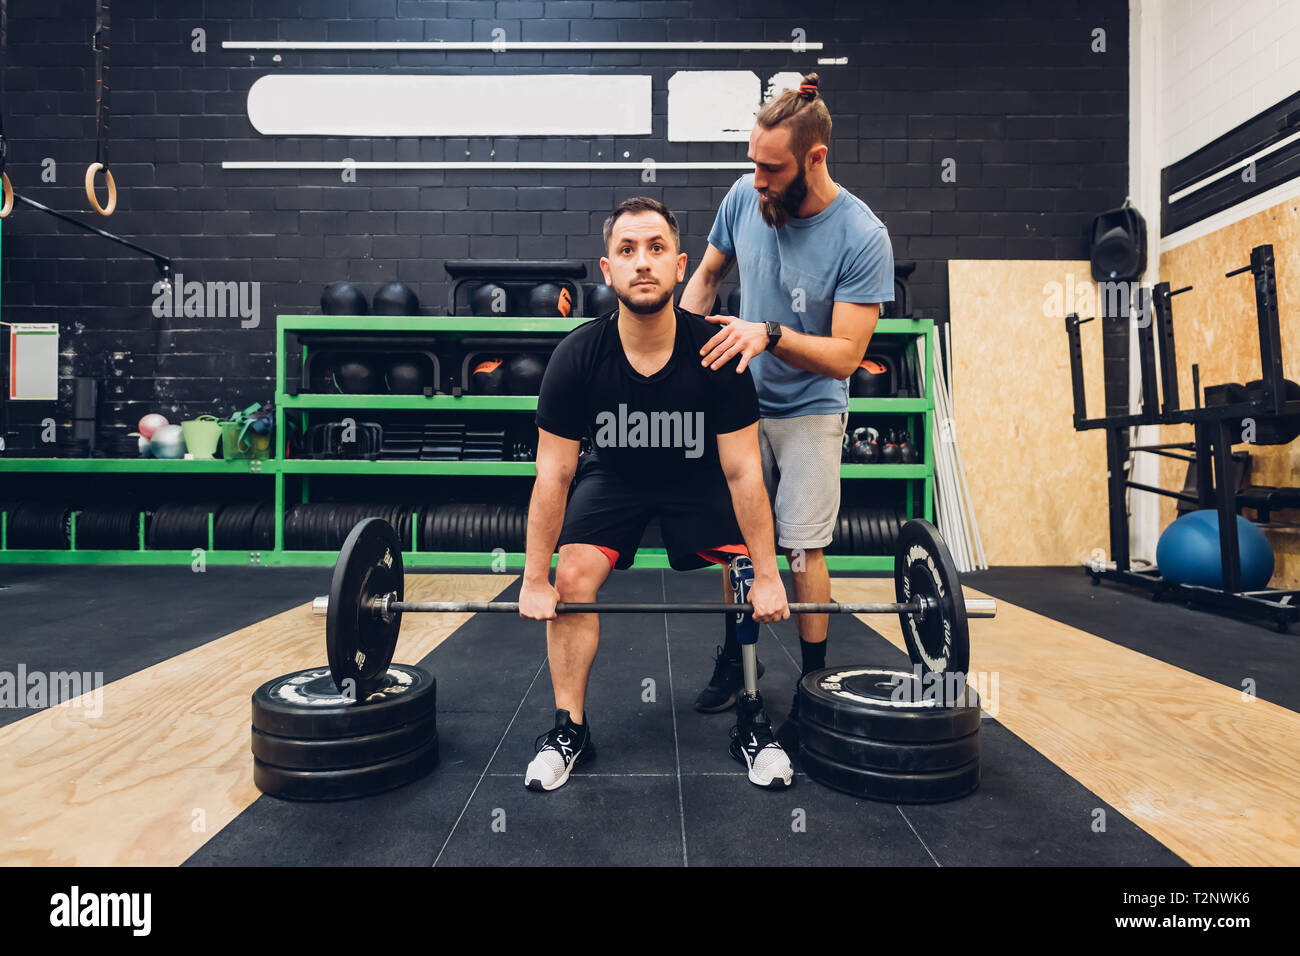 Man with prosthetic leg weight training in gym Stock Photo - Alamy